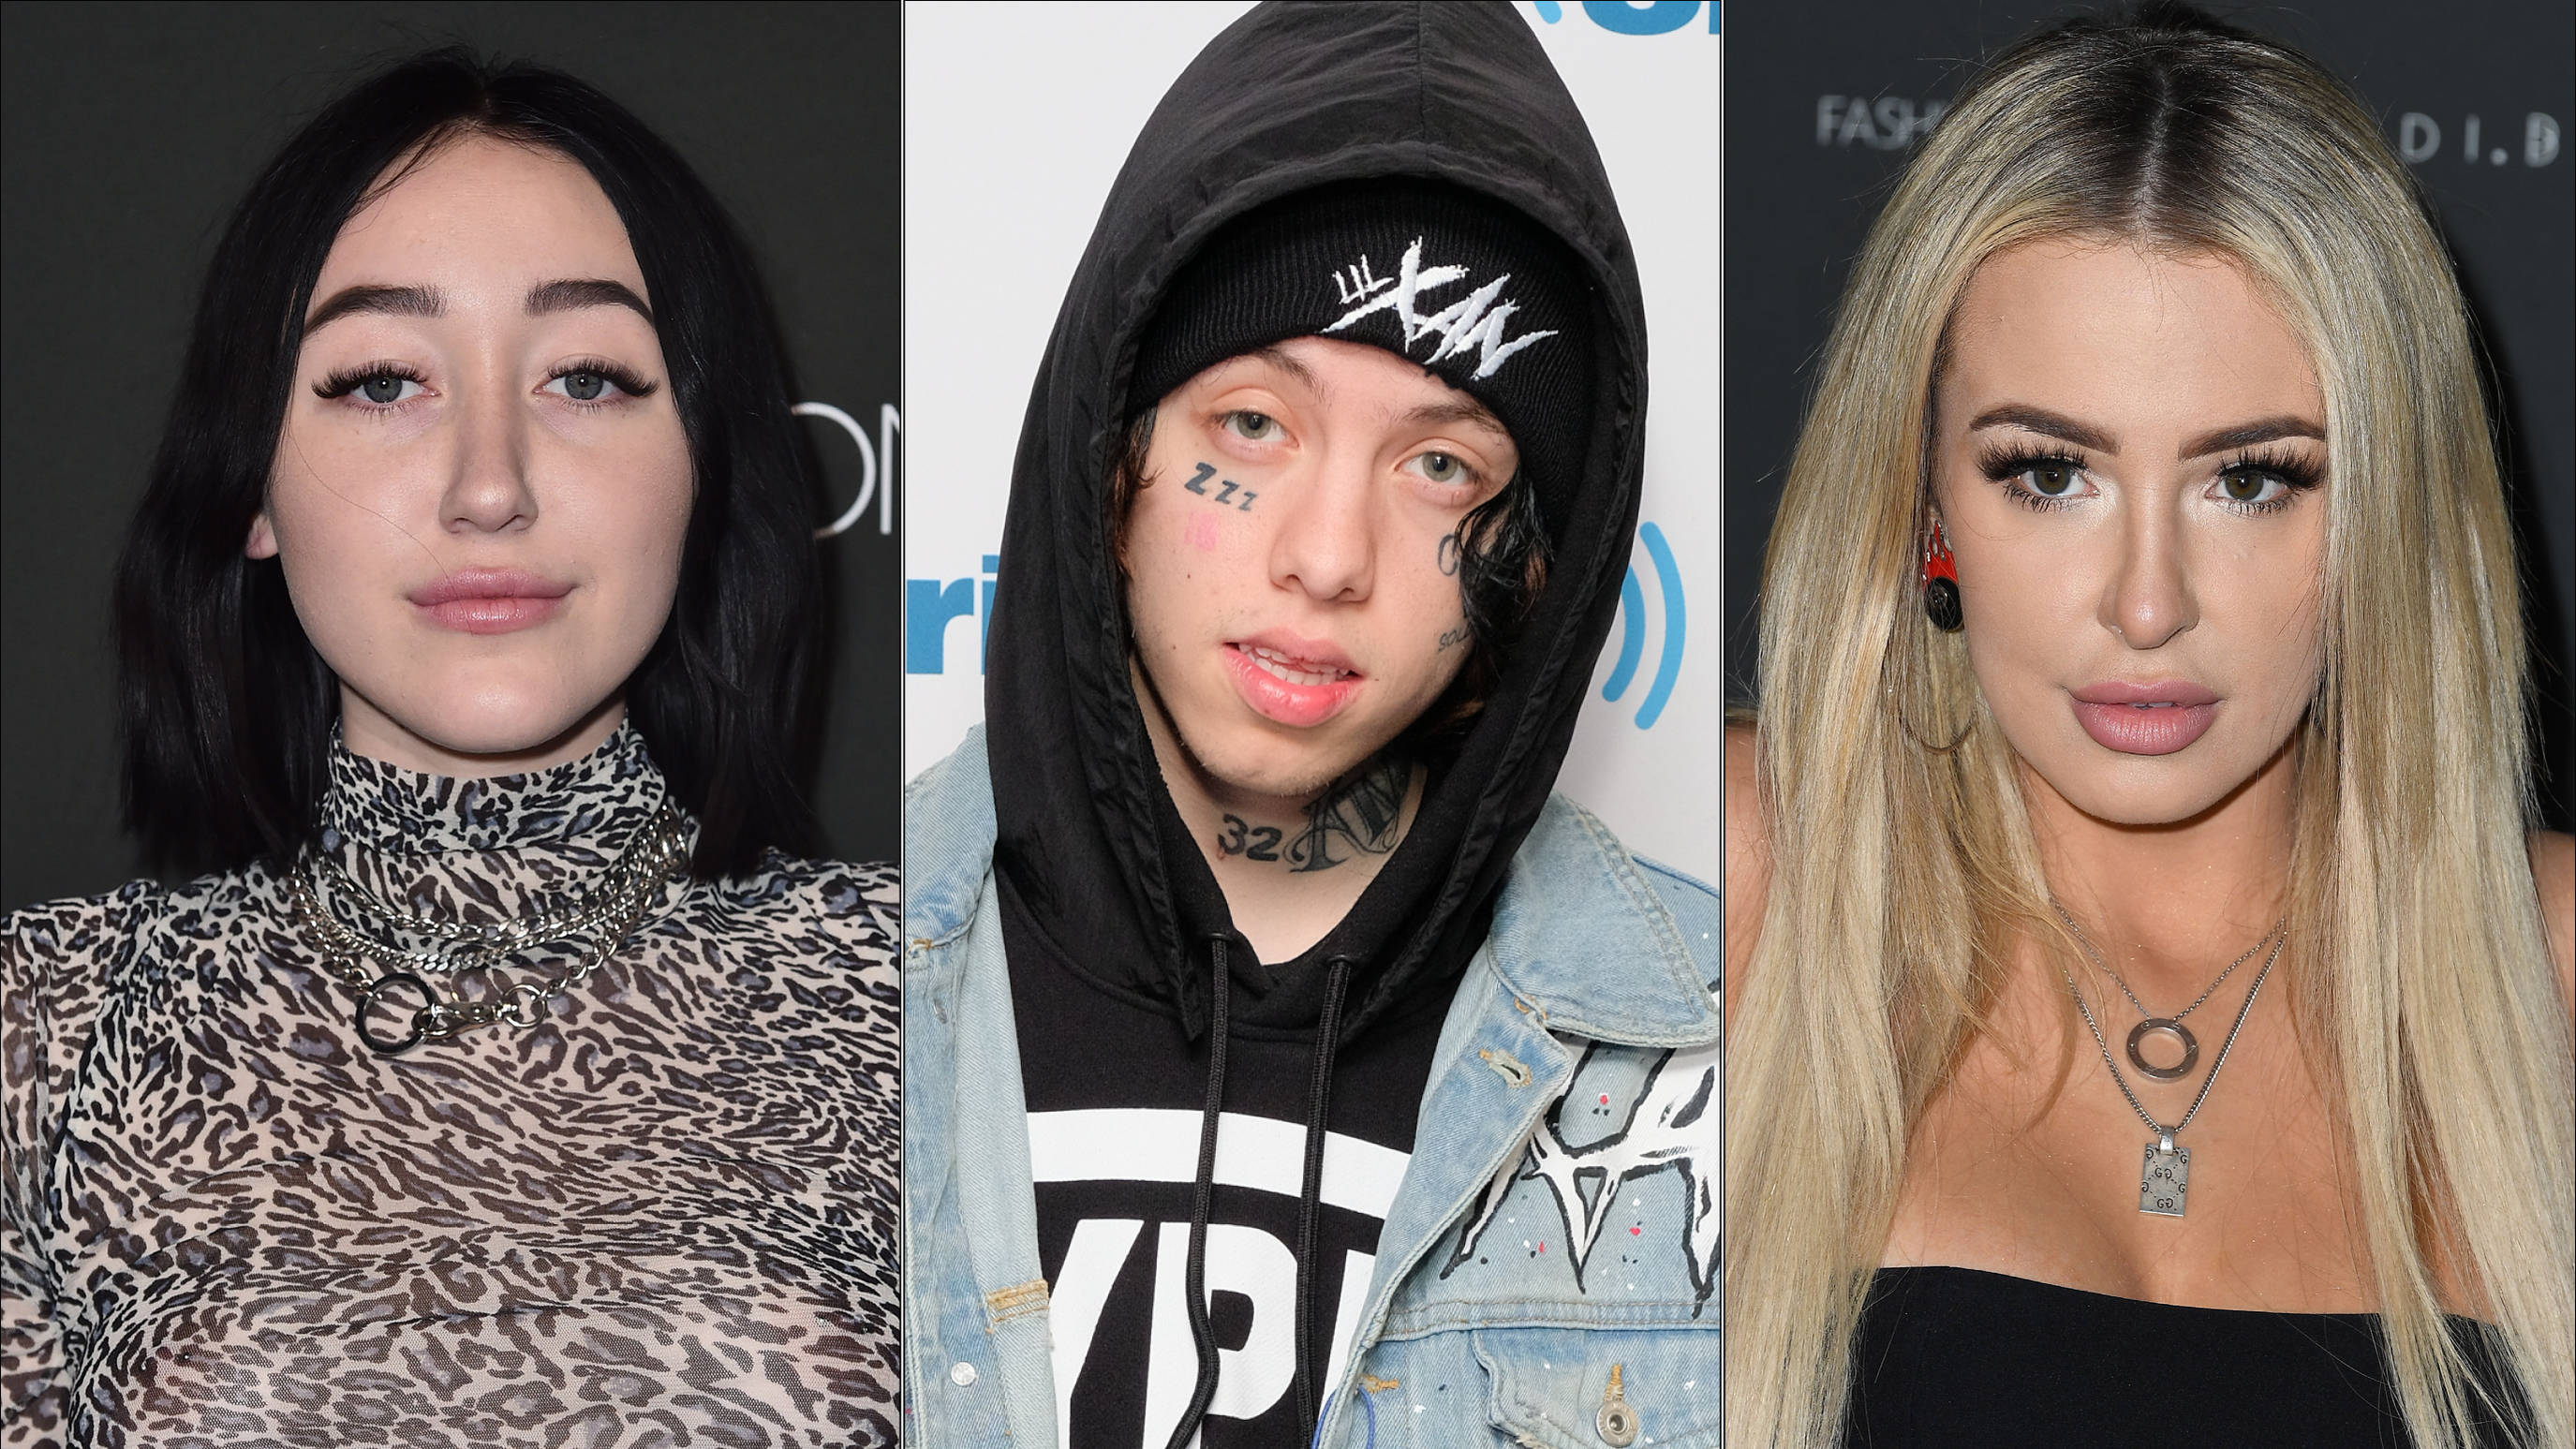 Noah Cyrus Responds To Tana Mongeaus Video About Their Mutual Ex.